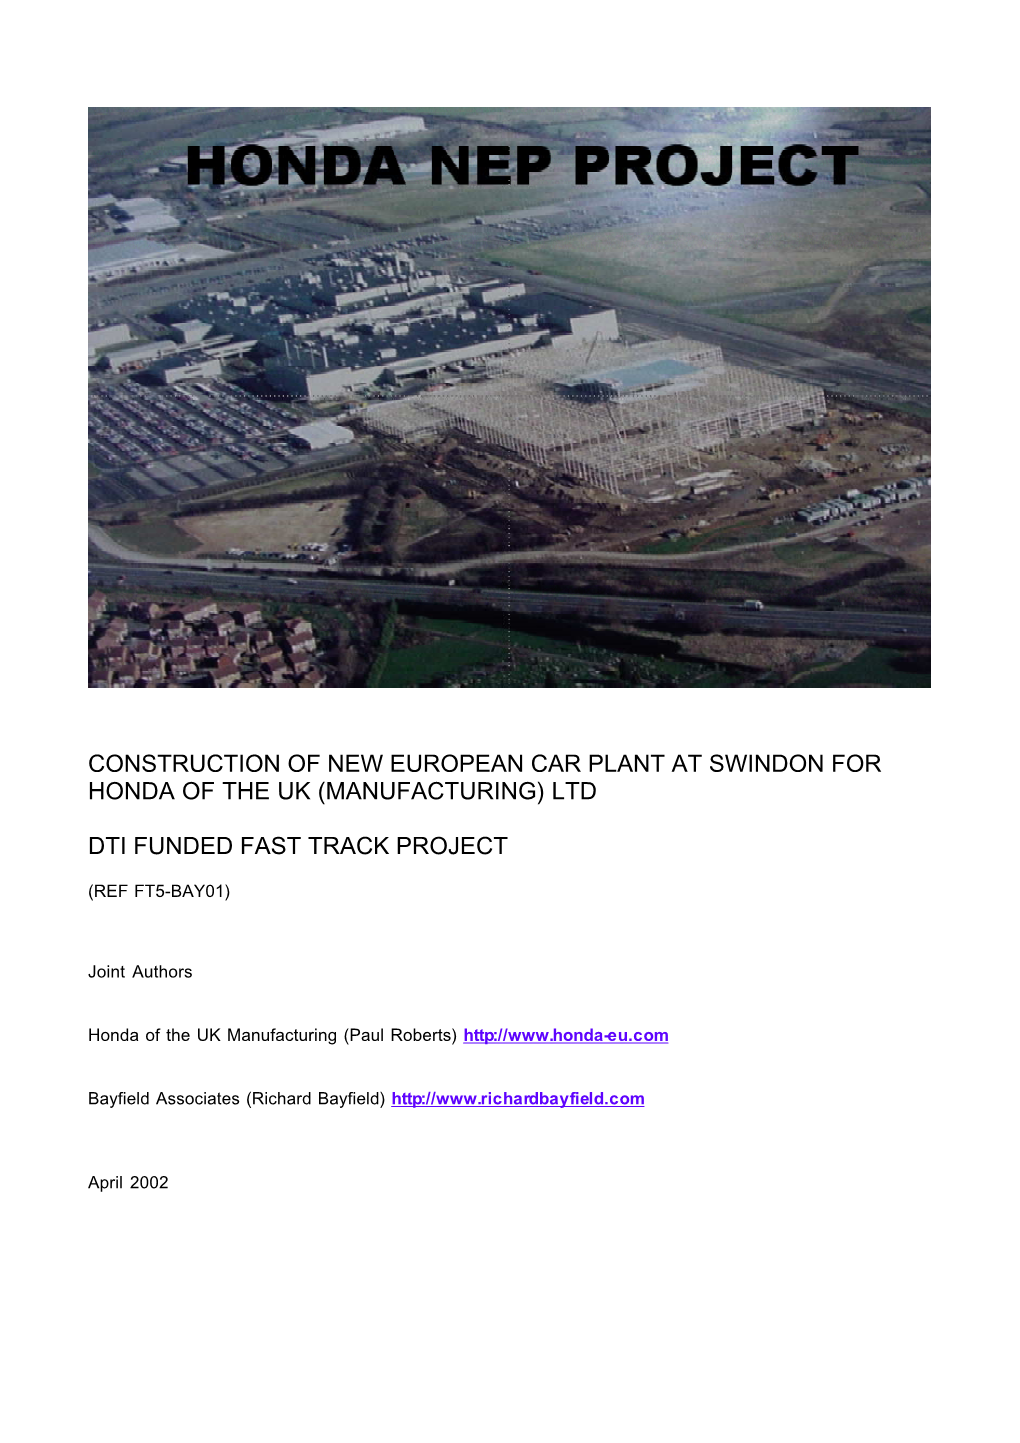 Construction of New European Car Plant at Swindon for Honda of the Uk (Manufacturing) Ltd